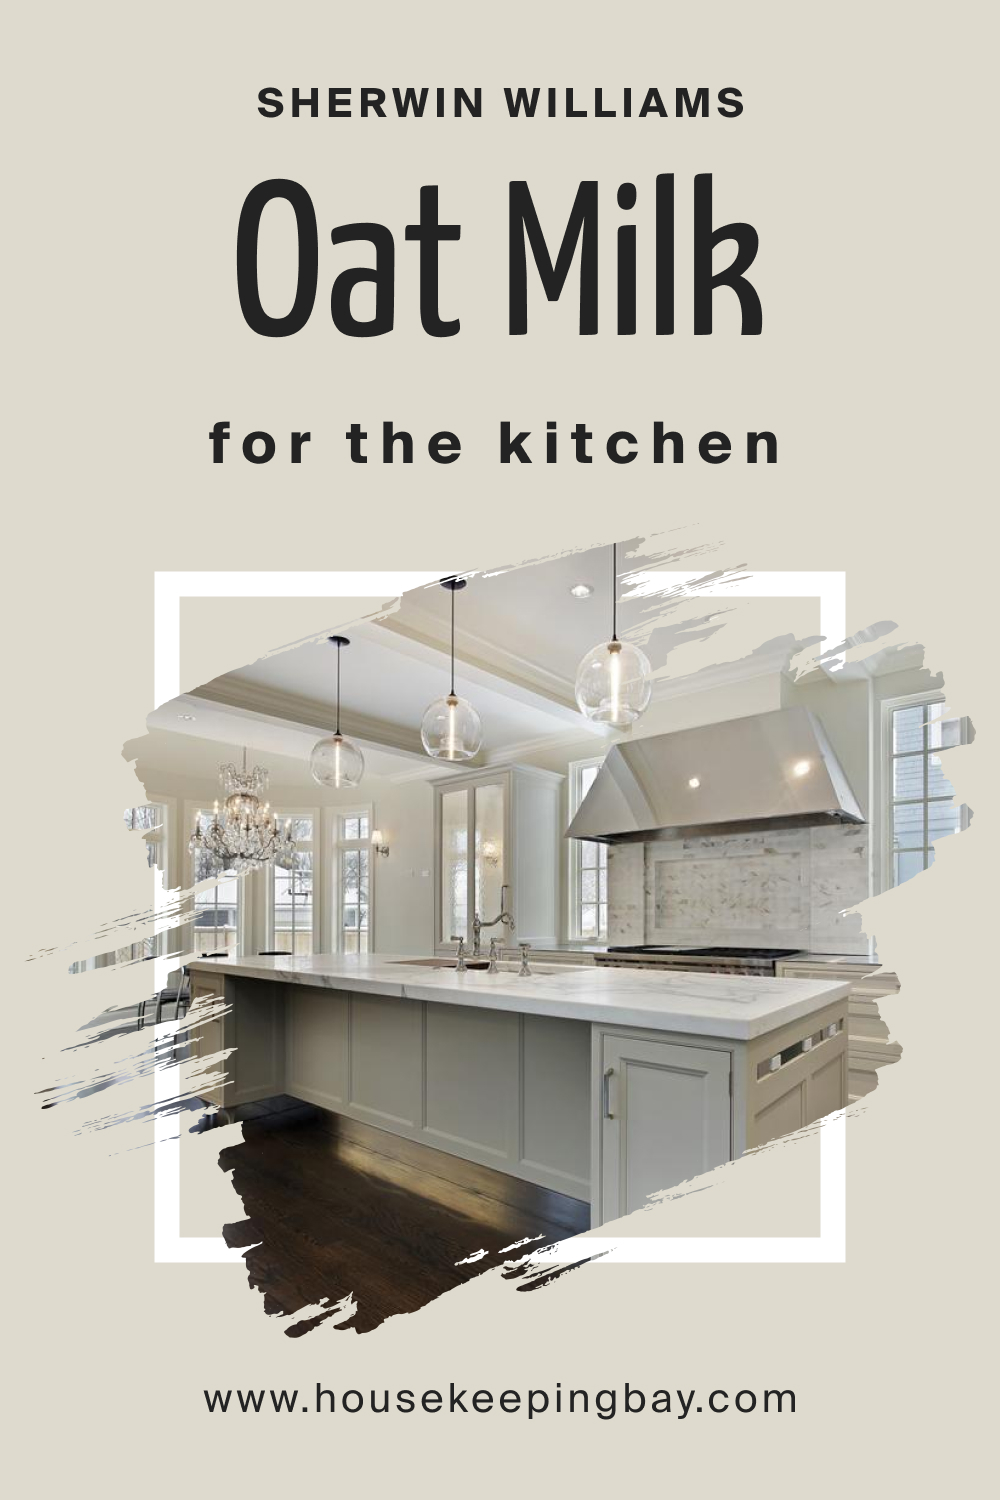 Sherwin Williams. SW 9501 Oat Milk For the Kitchens